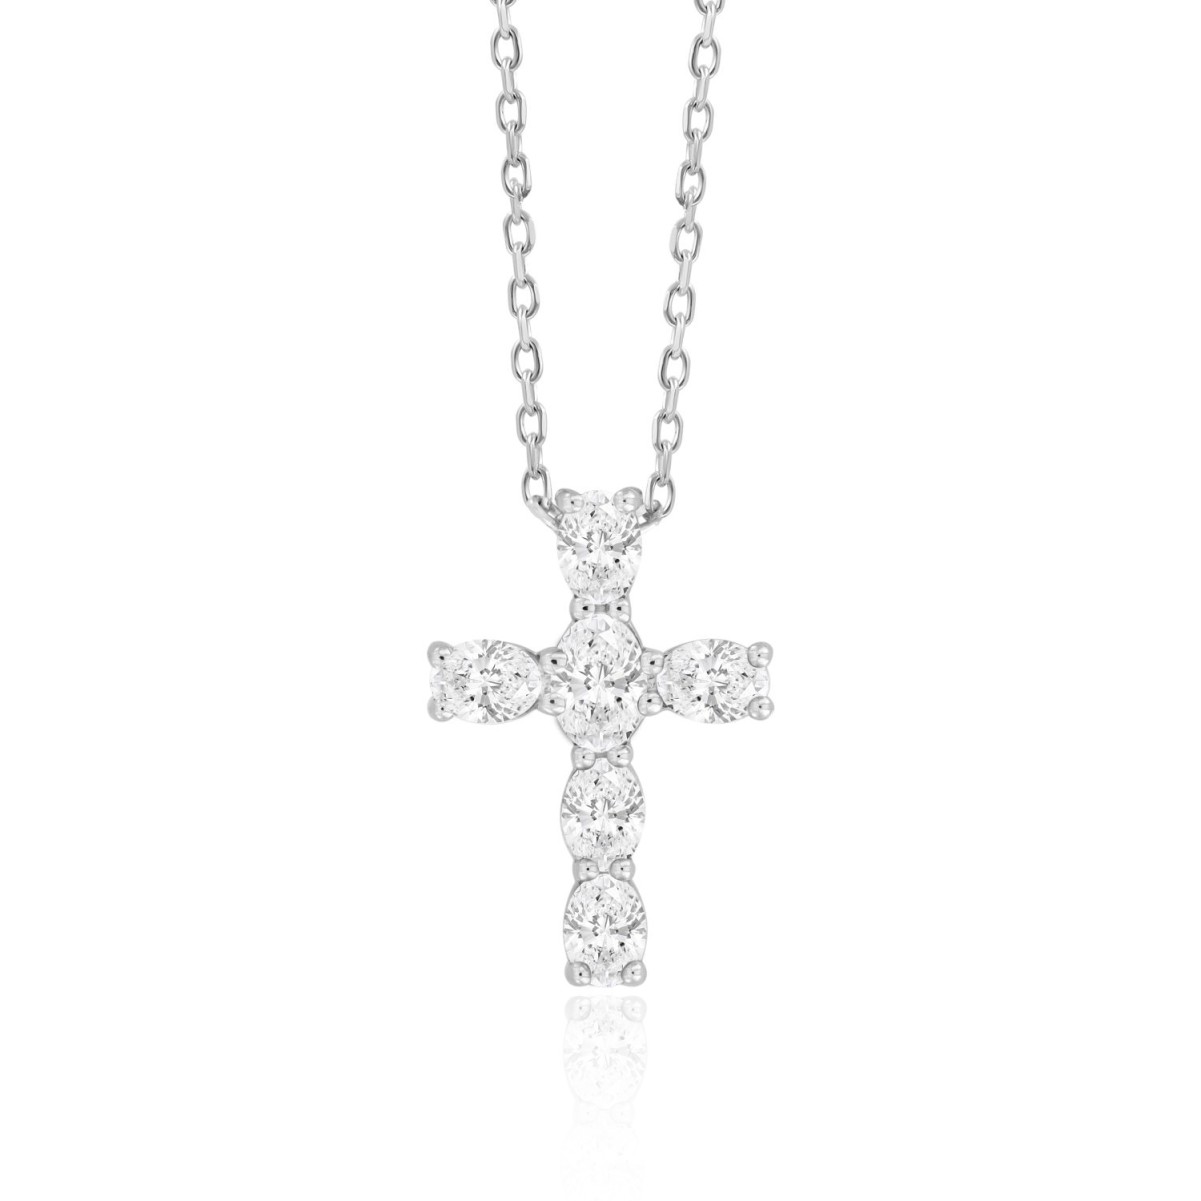 14K WHITE GOLD 1CT OVAL DIAMOND LADIES PENDANT WITH CHAIN 